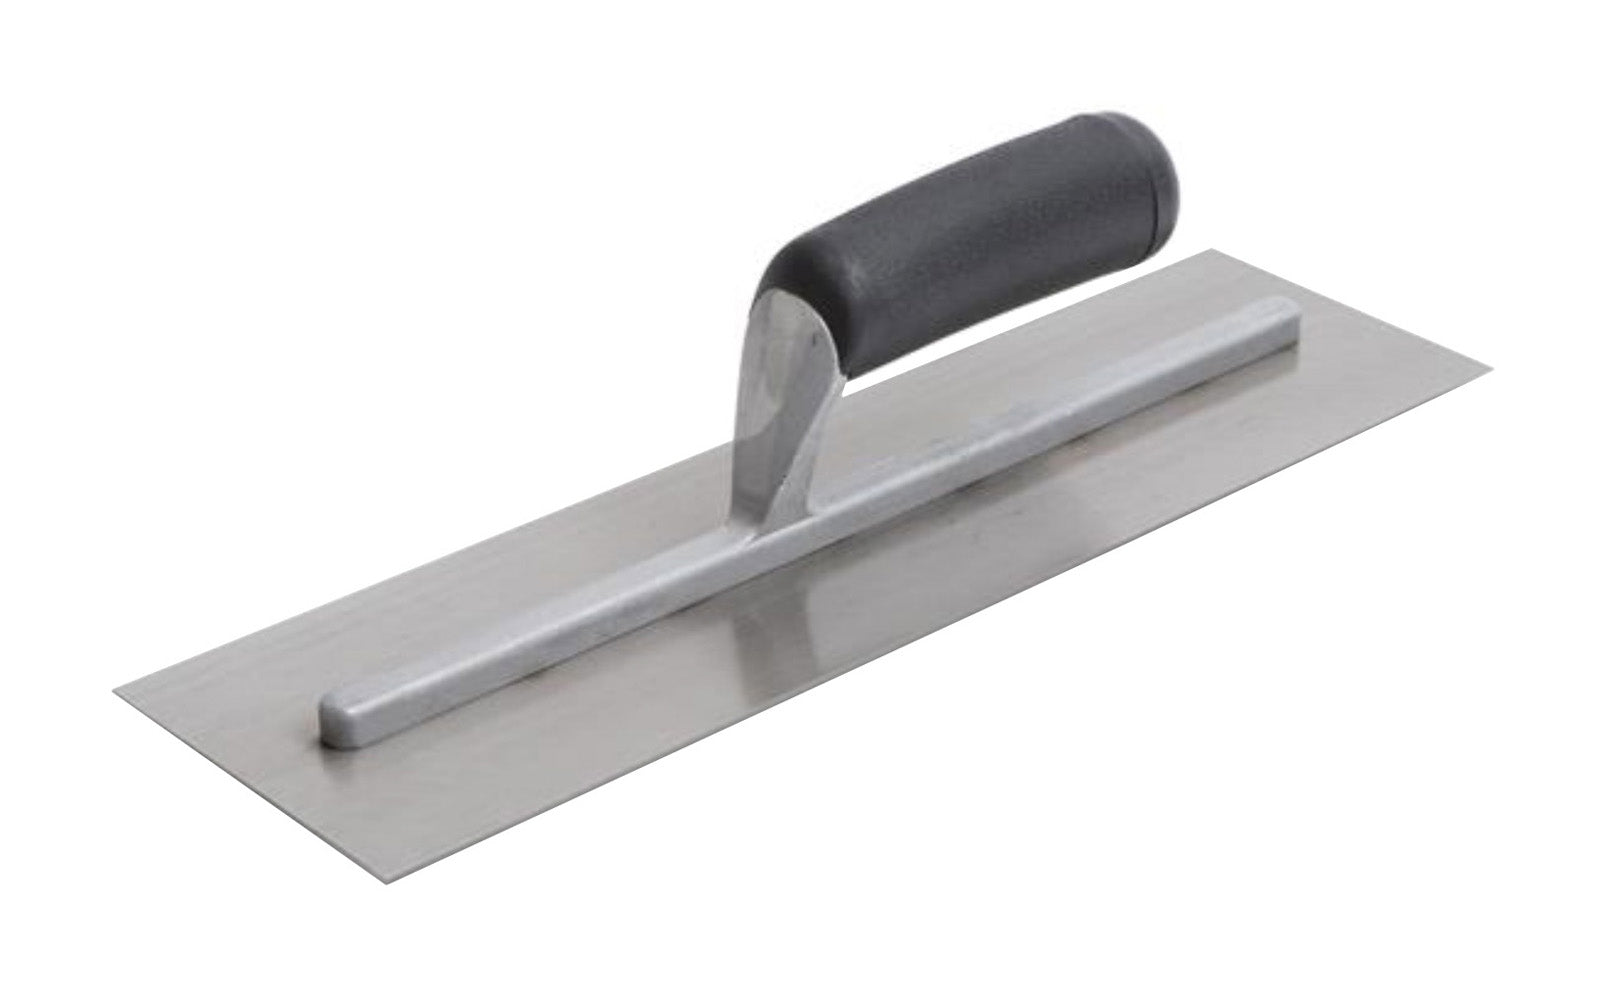 This Marshalltown 11" x 4-1/2" Finishing Trowel has a cast aluminum mounting securely riveted to the tempered, polished steel blade. Marshalltown Model FT114P ~ 035965083423